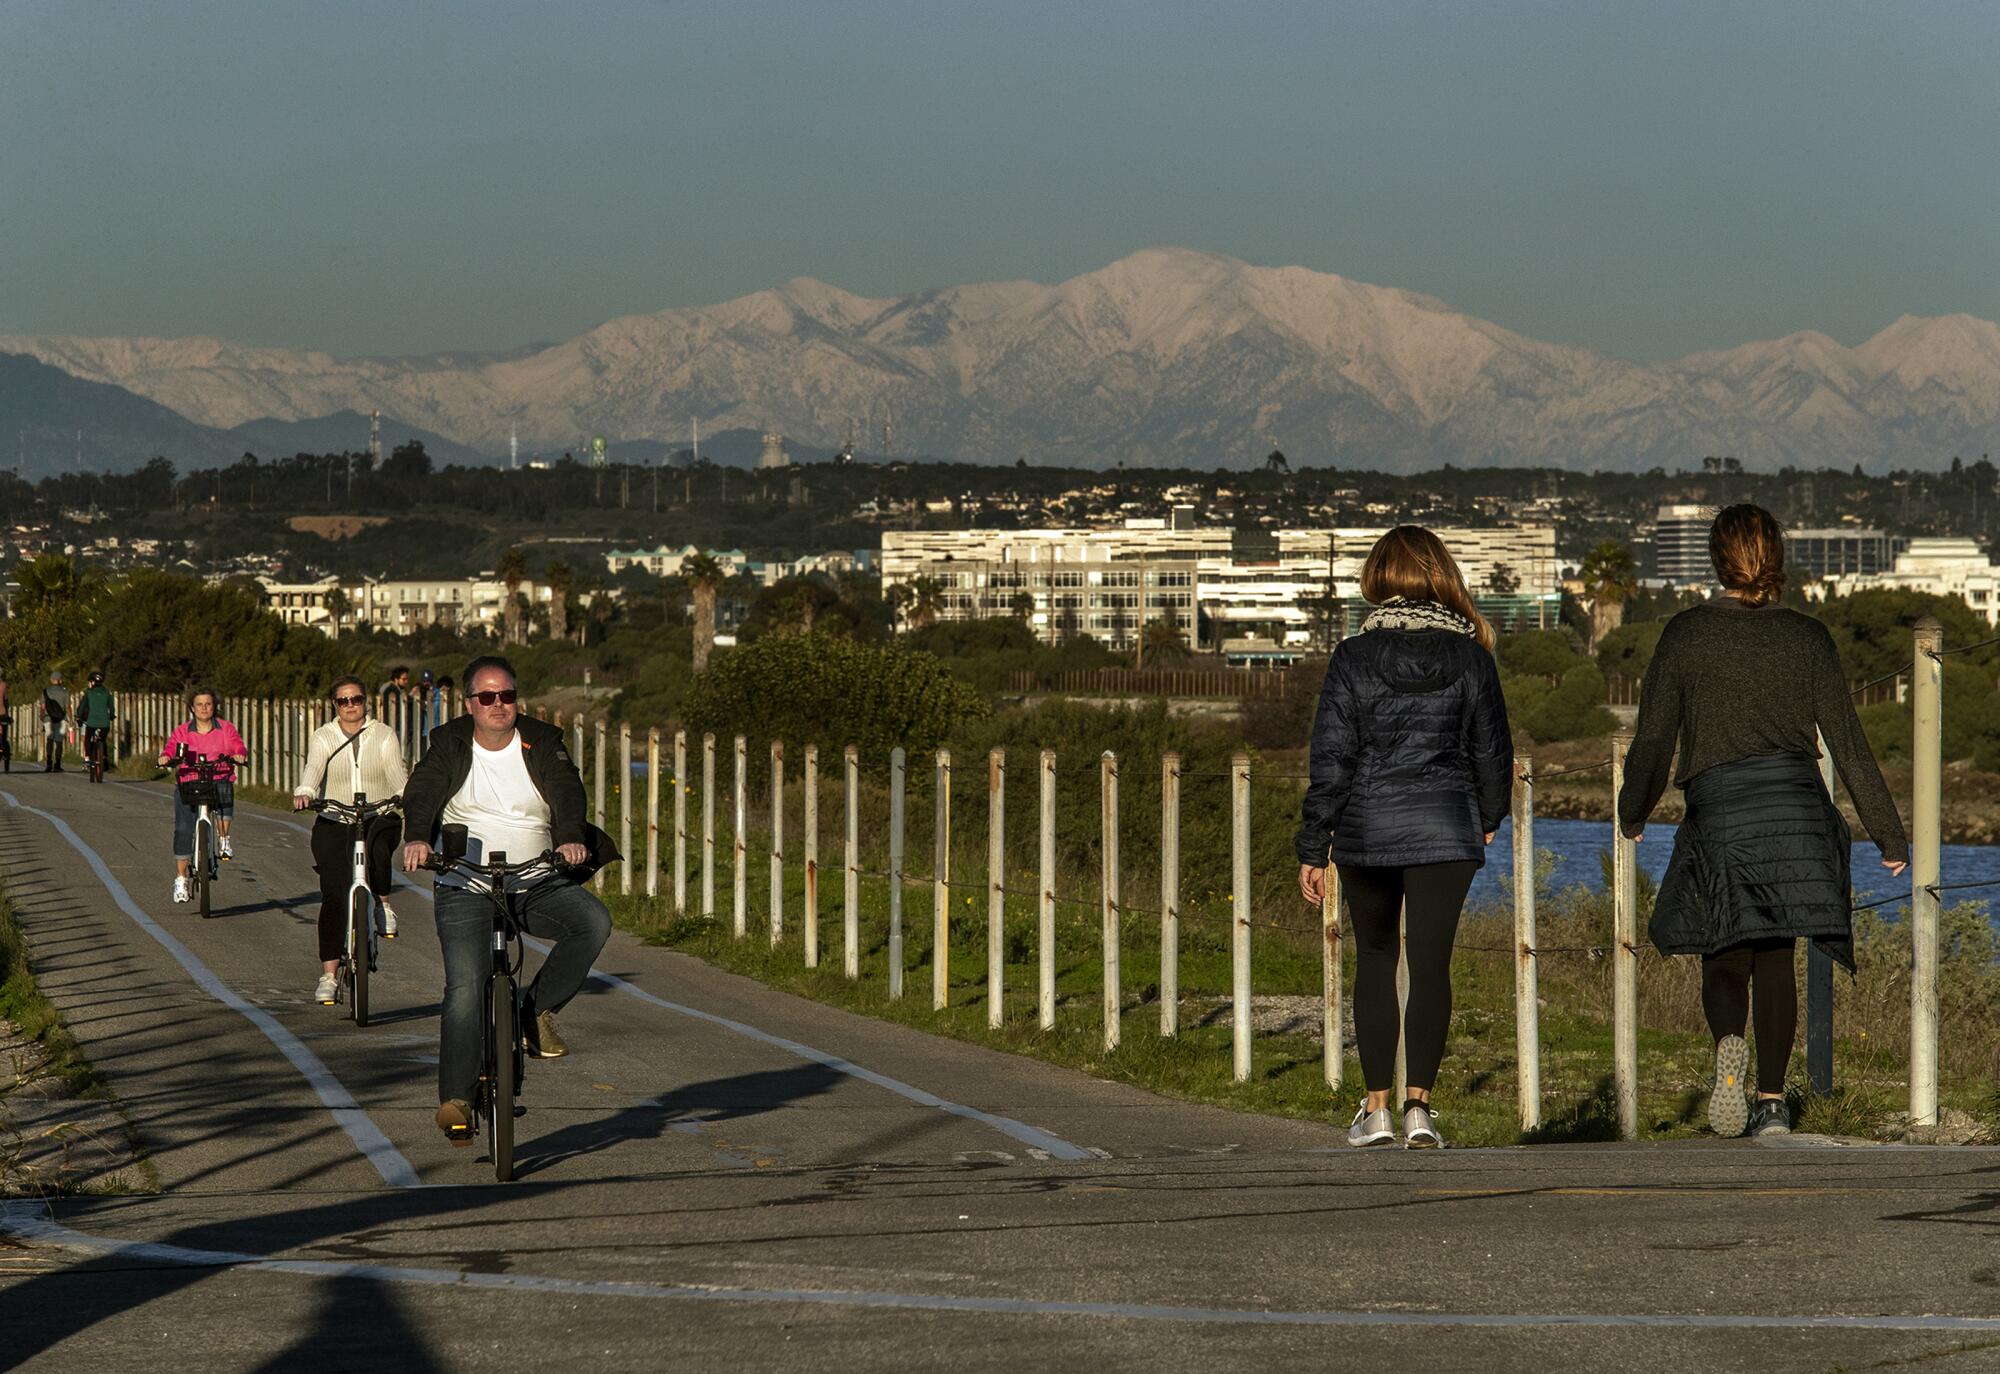 A bike trail with a snow-capped mountain as a backdrop.